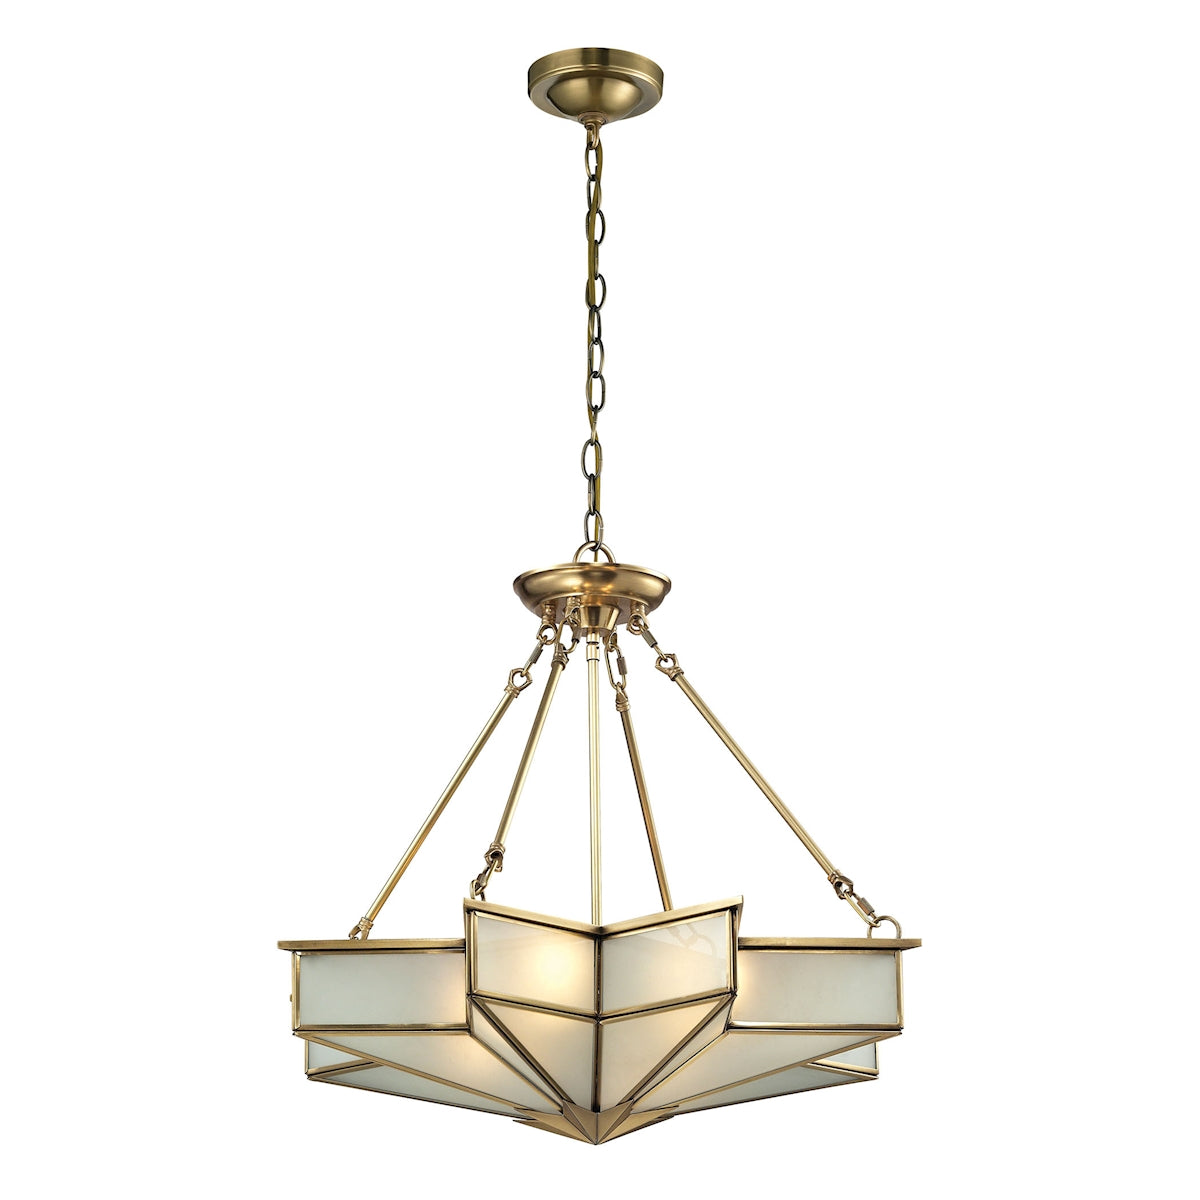 ELK Lighting 22012/4 Decostar 4-Light Chandelier in Brushed Brass with Frosted Glass Panels